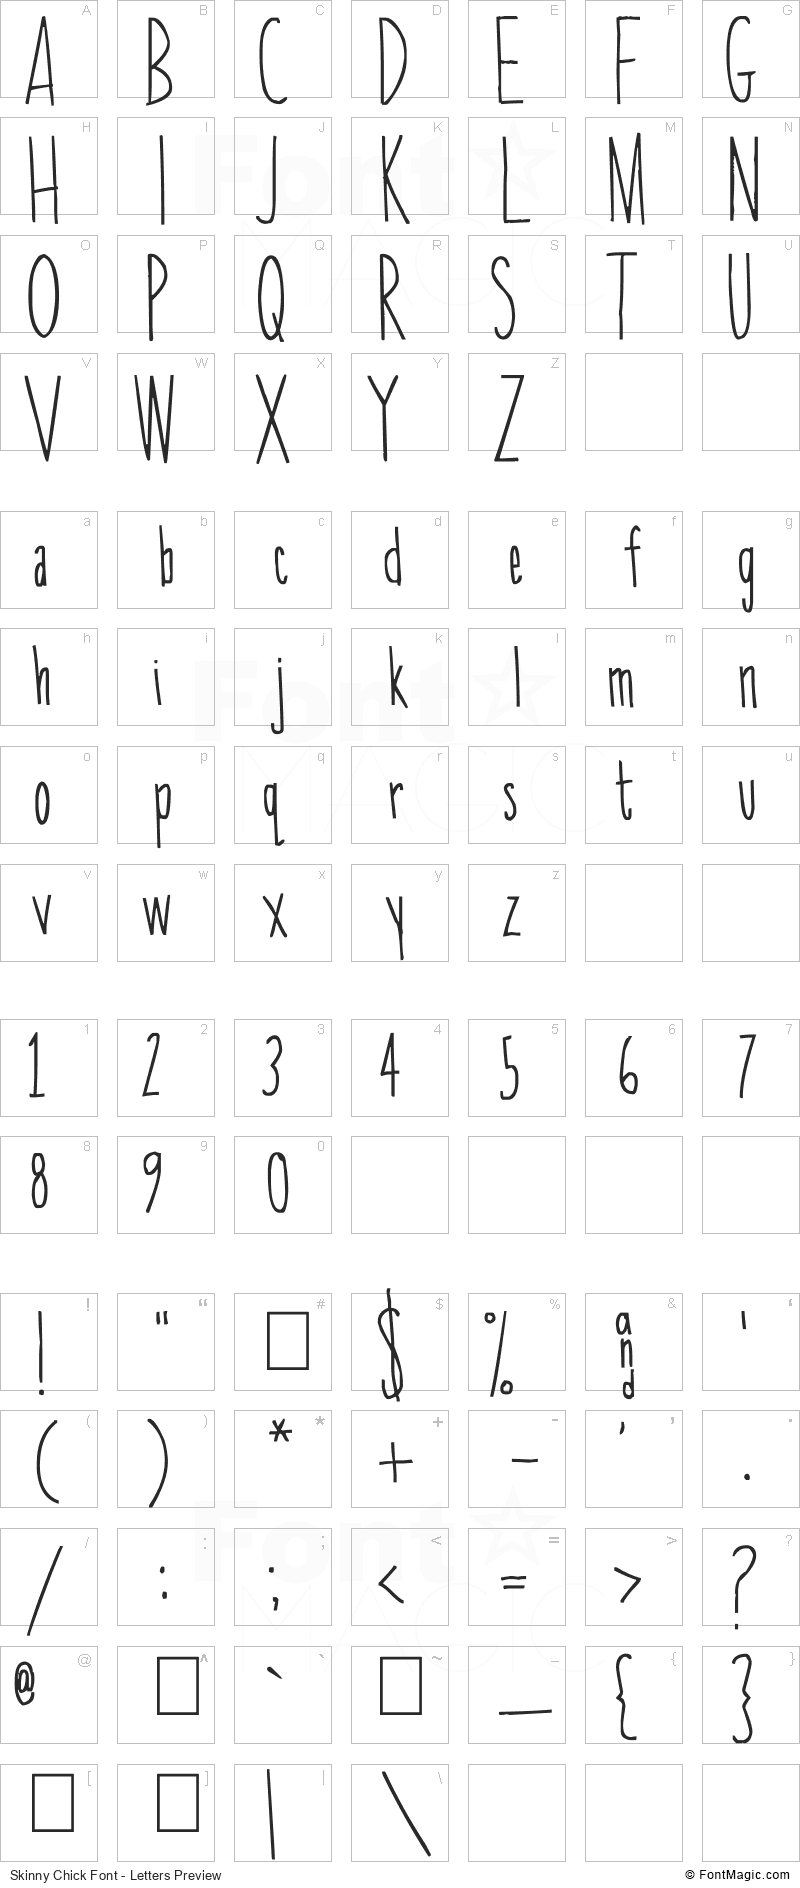 Skinny Chick Font - All Latters Preview Chart